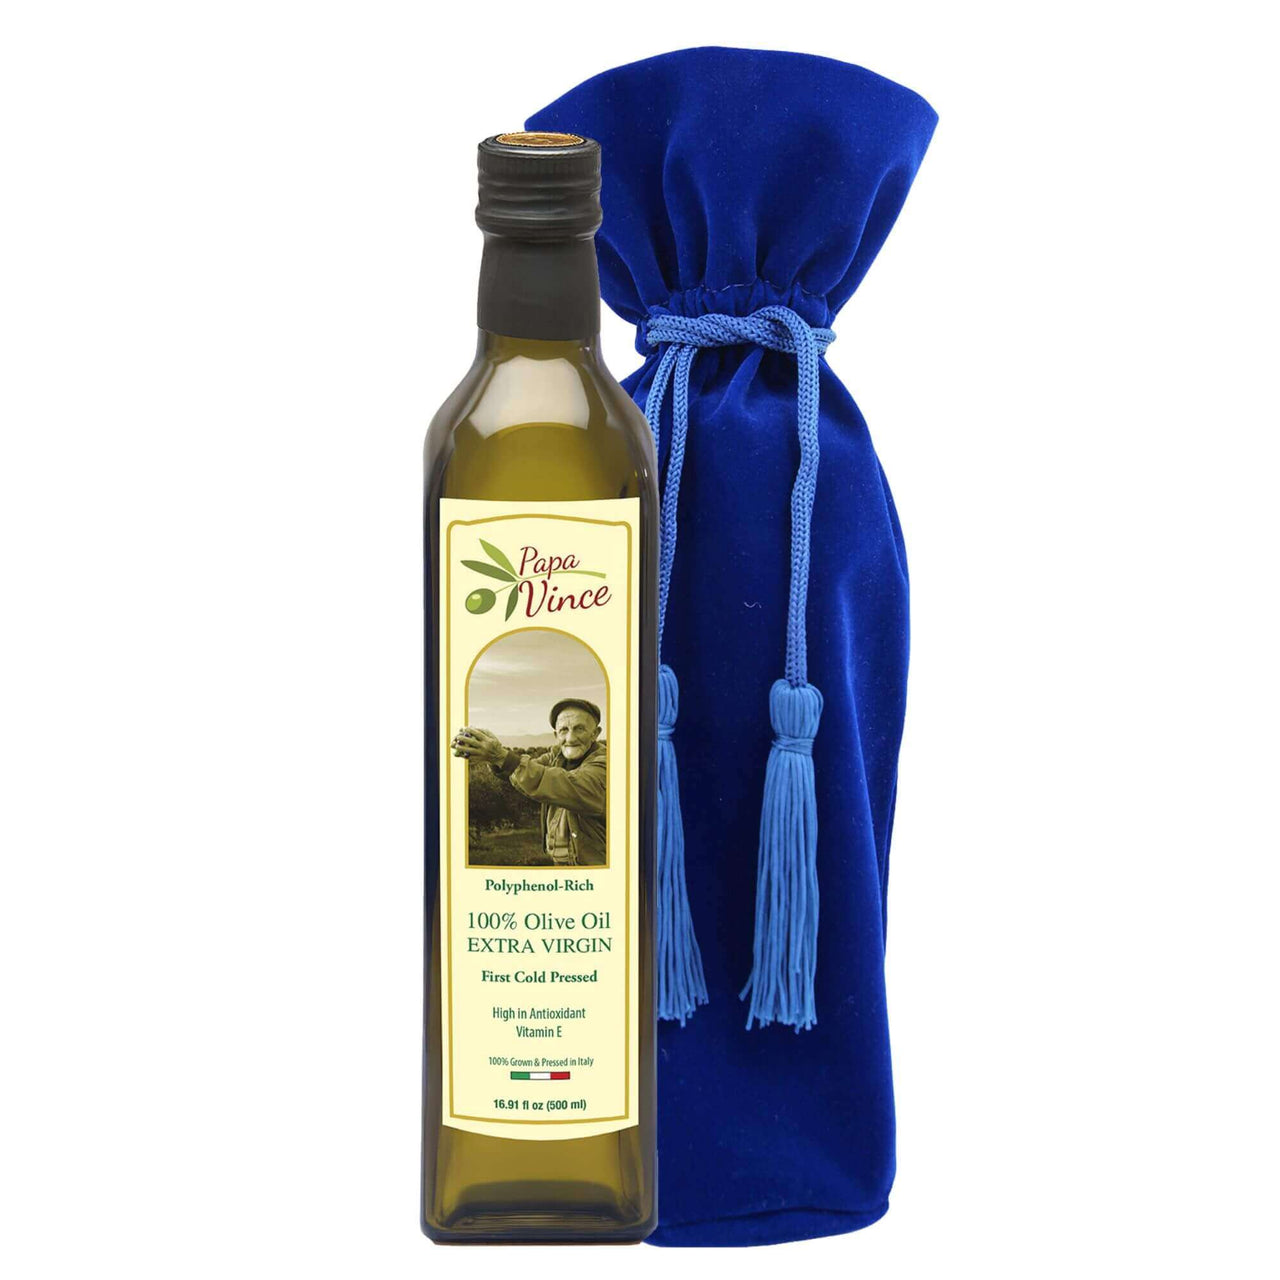 Papa Vince Olive Oil Extra Virgin Gift - Unblended, Family Harvest 2022/23, High in Polyphenols, Single Estate, First Cold Pressed, Sicily, Italy, Peppery Finish, Unfiltered, Unrefined, Velvet Blue - Papa Vince